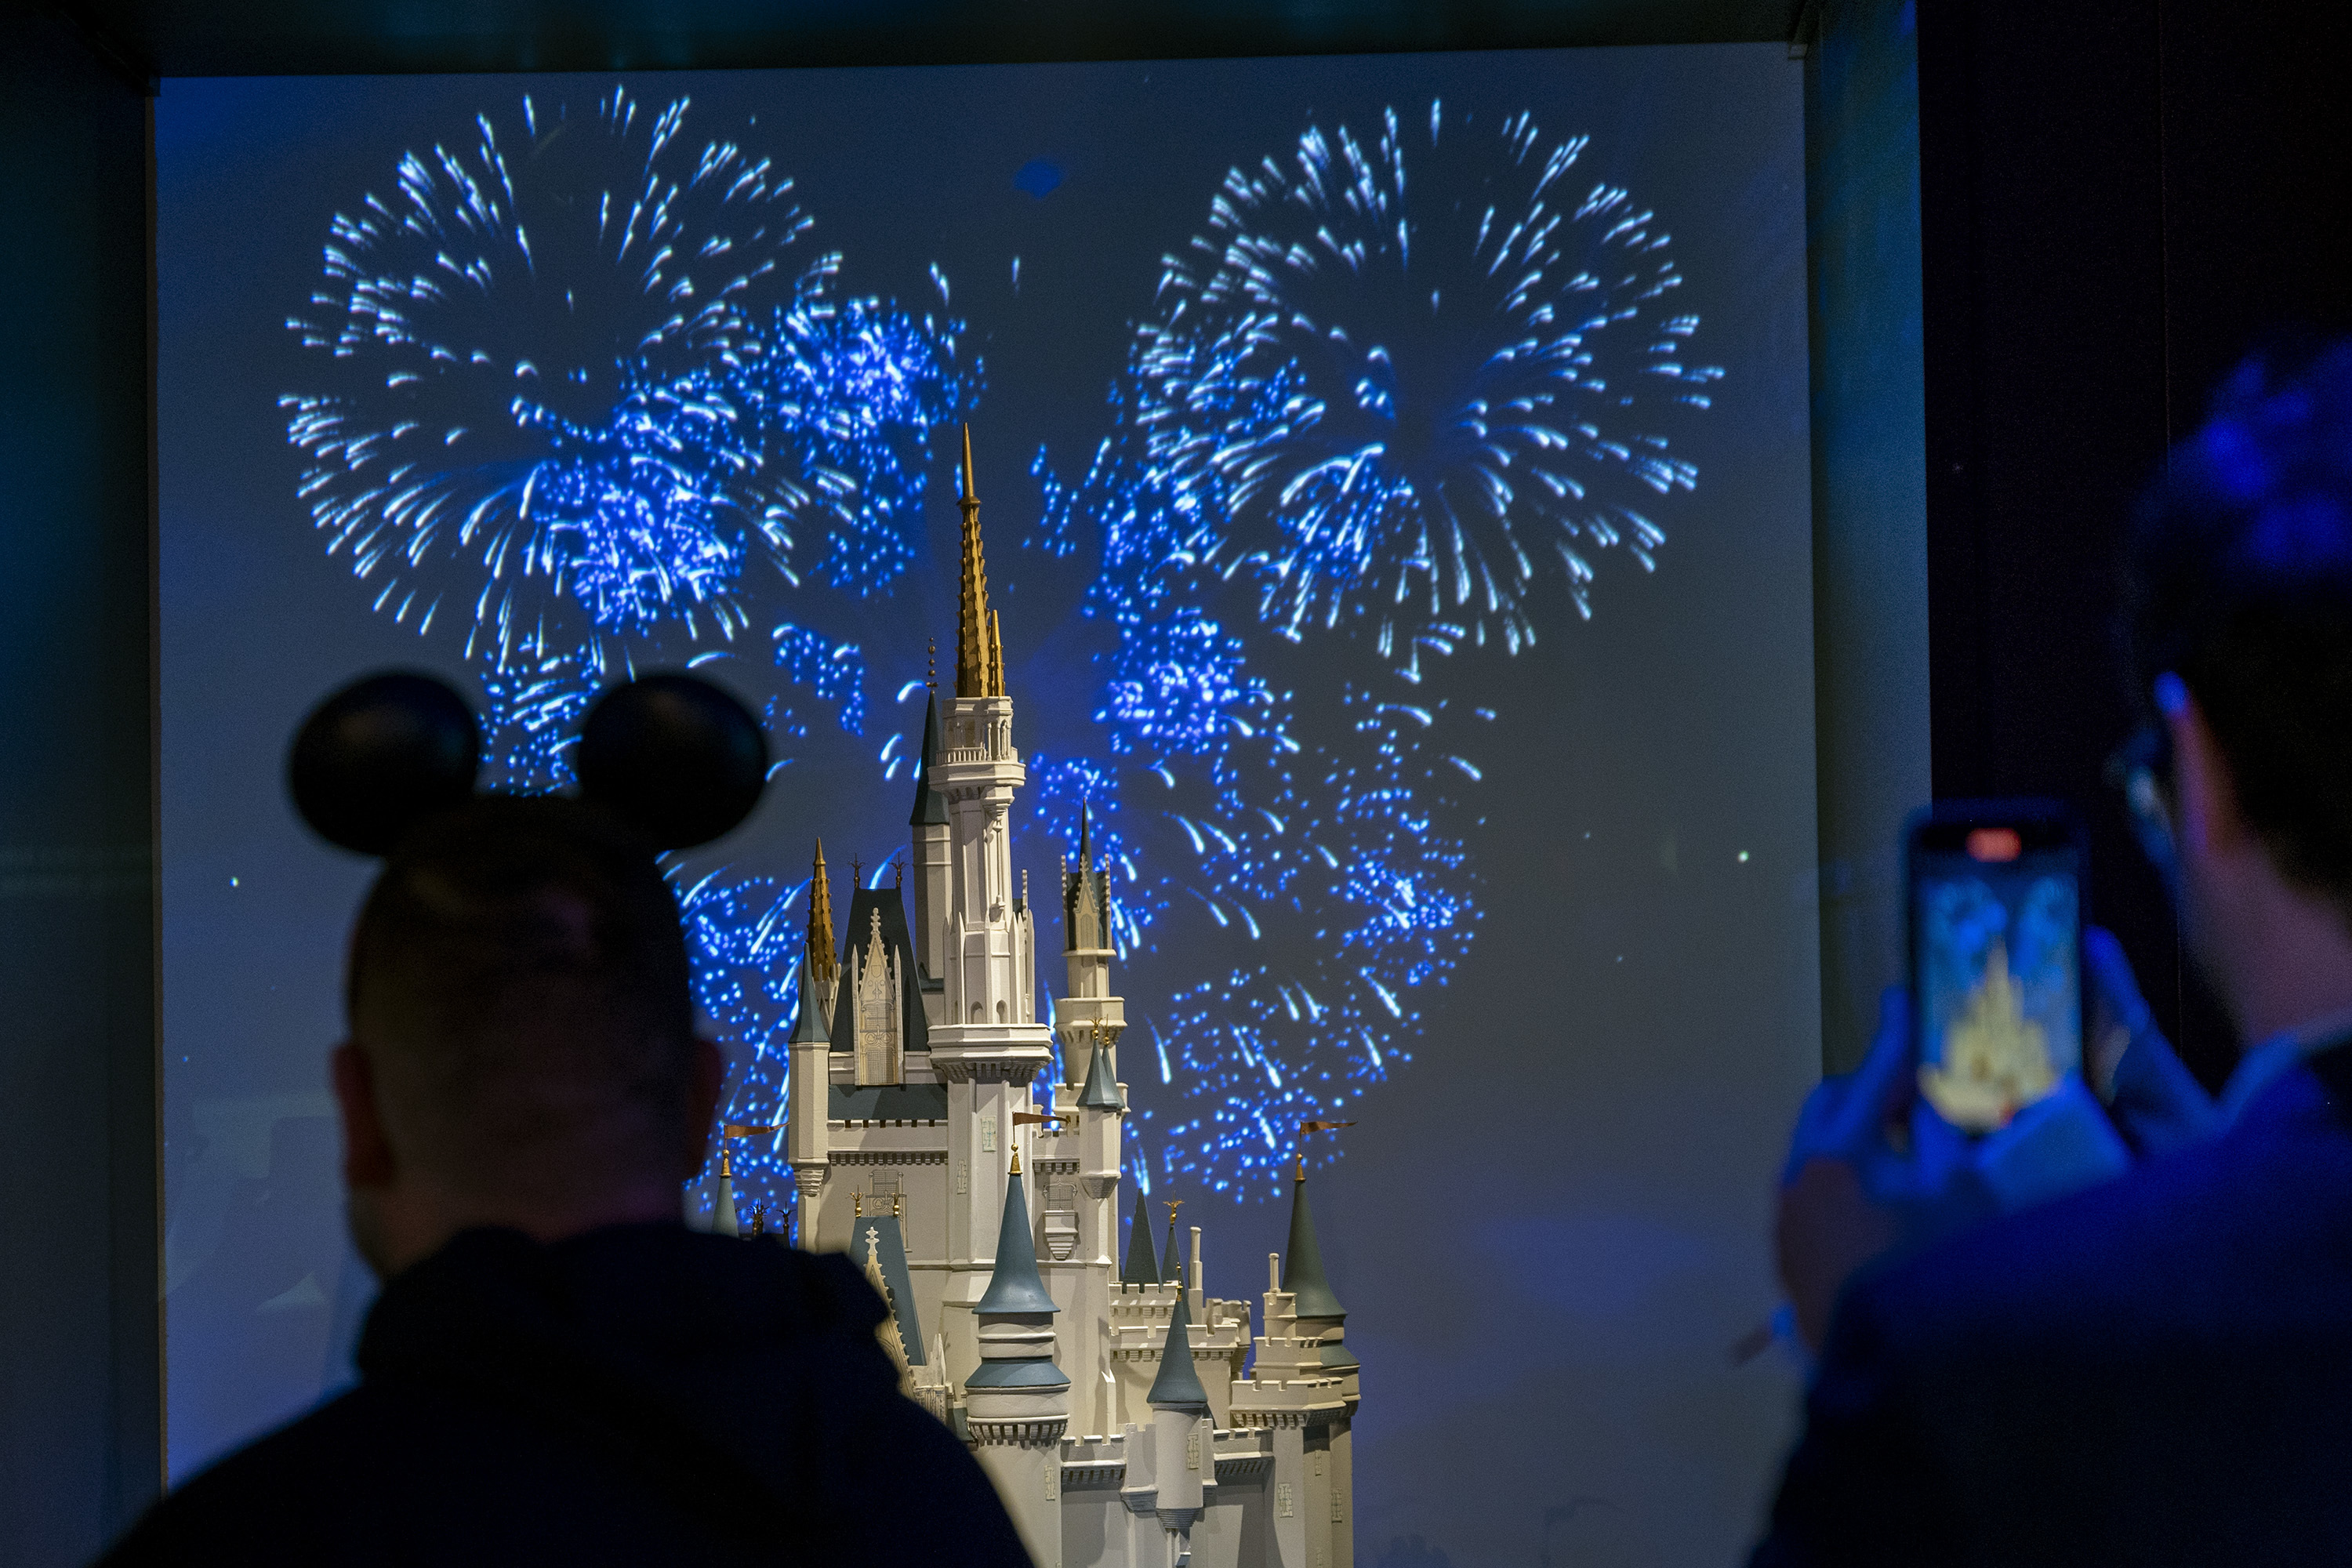 Disney100: The Exhibition's Seven Most Surprising Moments